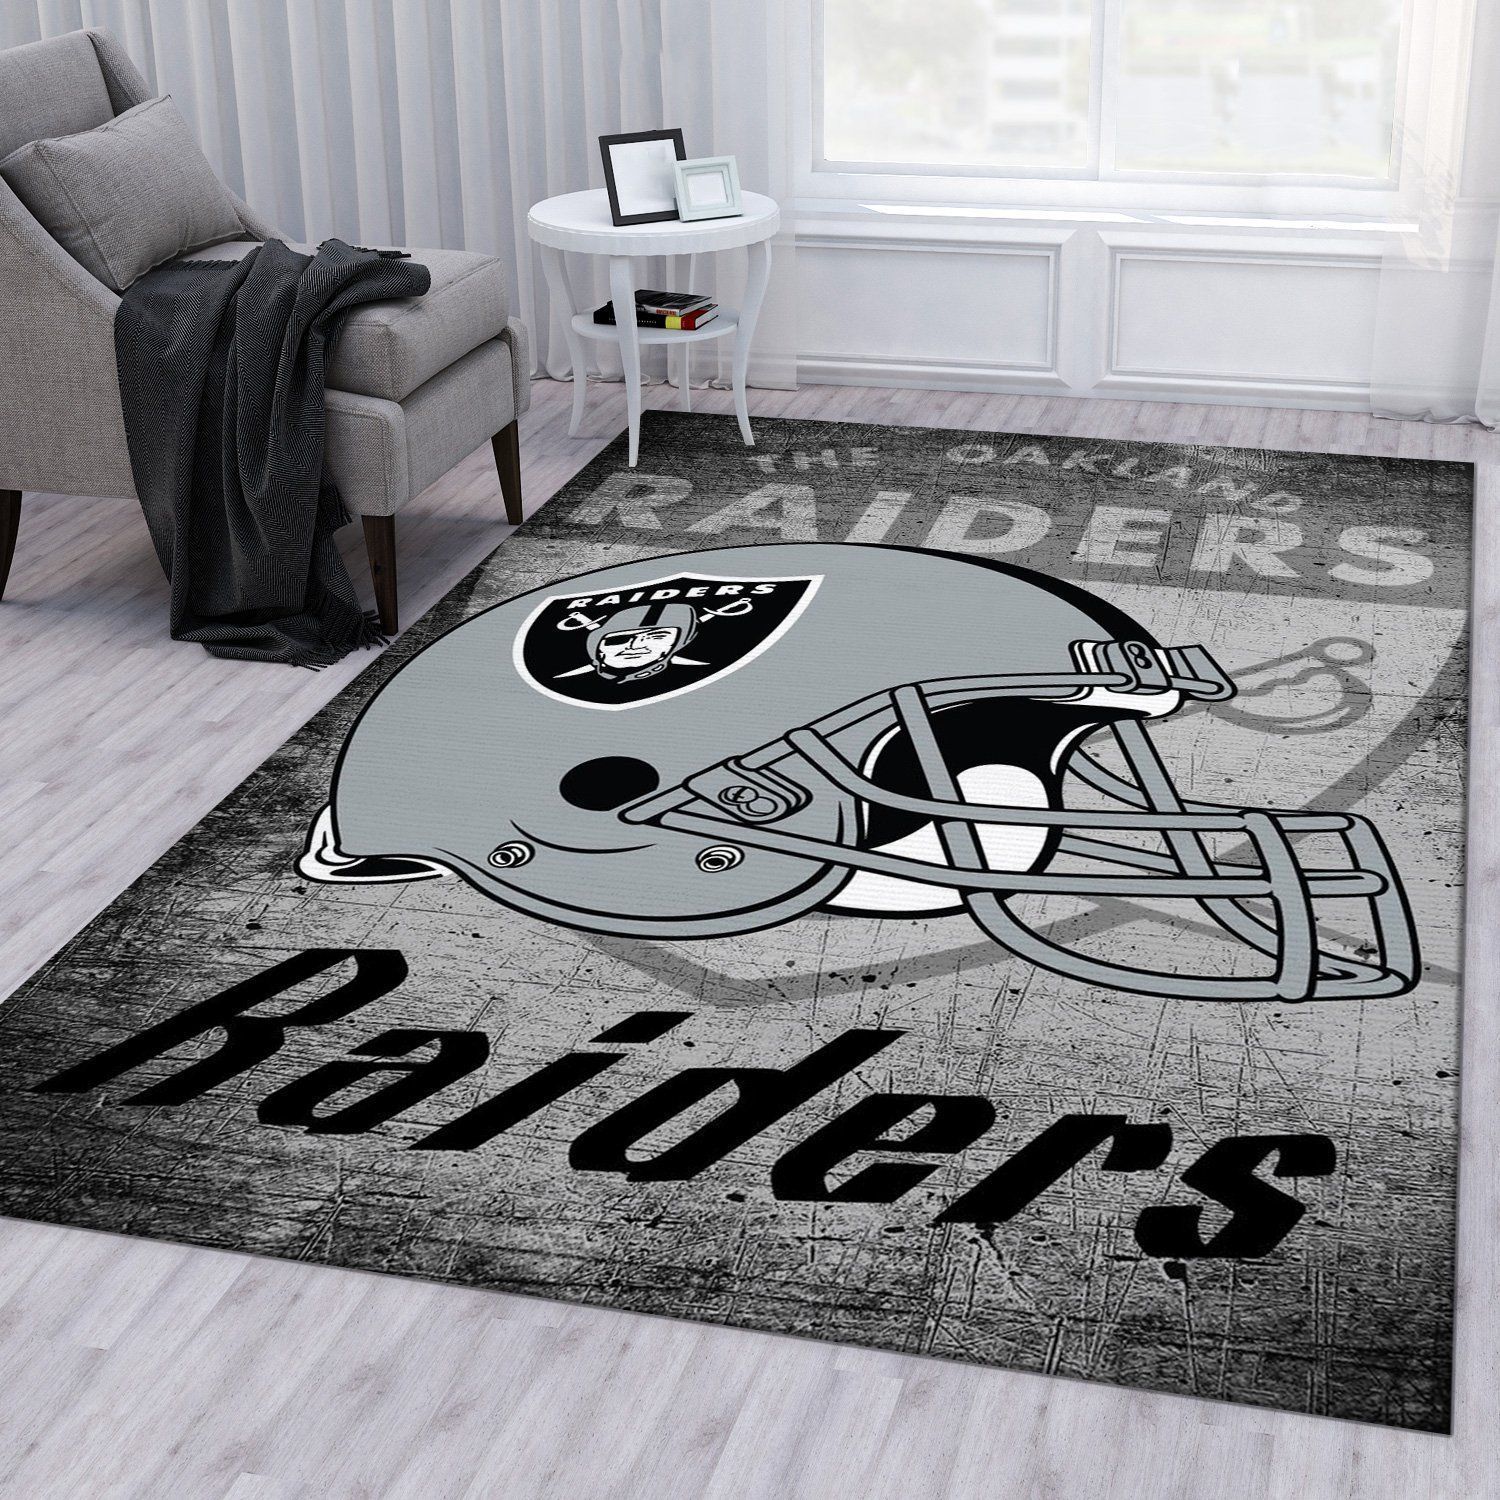 Los Angeles Raiders Retro Nfl Football Team Area Rug For Gift Living Room Rug US Gift Decor - Indoor Outdoor Rugs 1